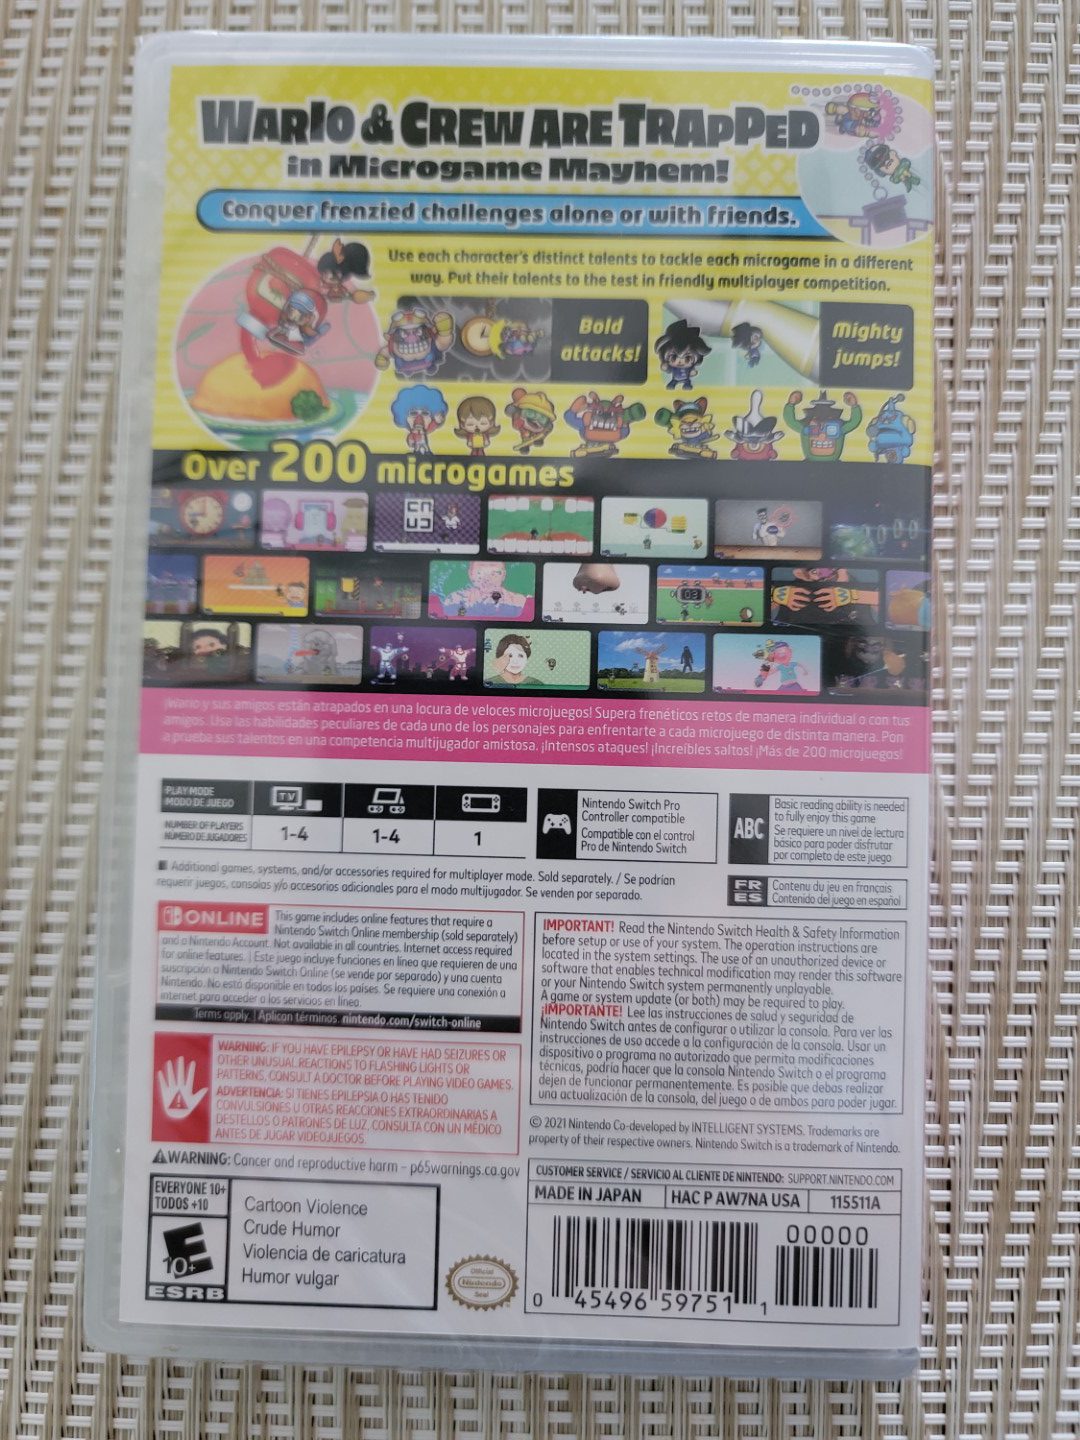 Back Box Art of the Nintendo Switch game Wario Ware: Get It Together